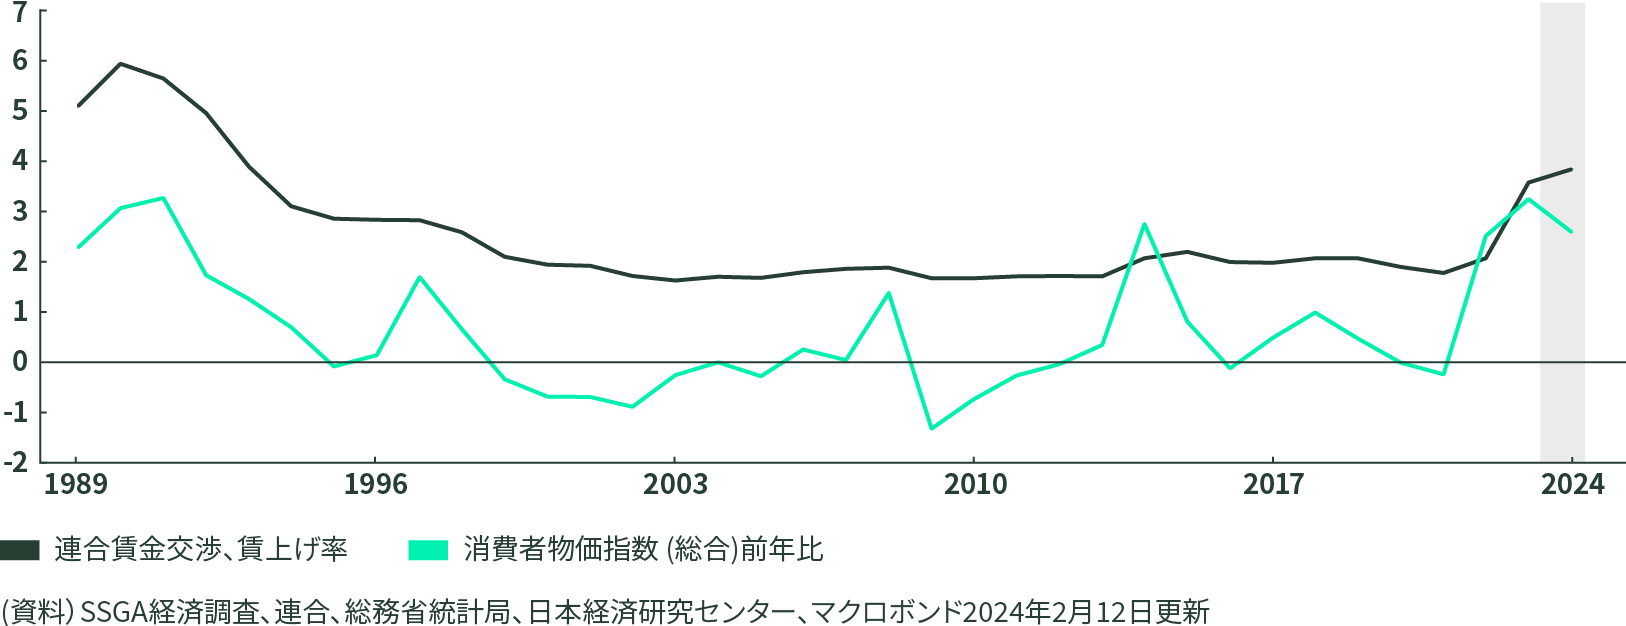 Figure 3: Real Wage Growth Expected to Support Consumption in 2024